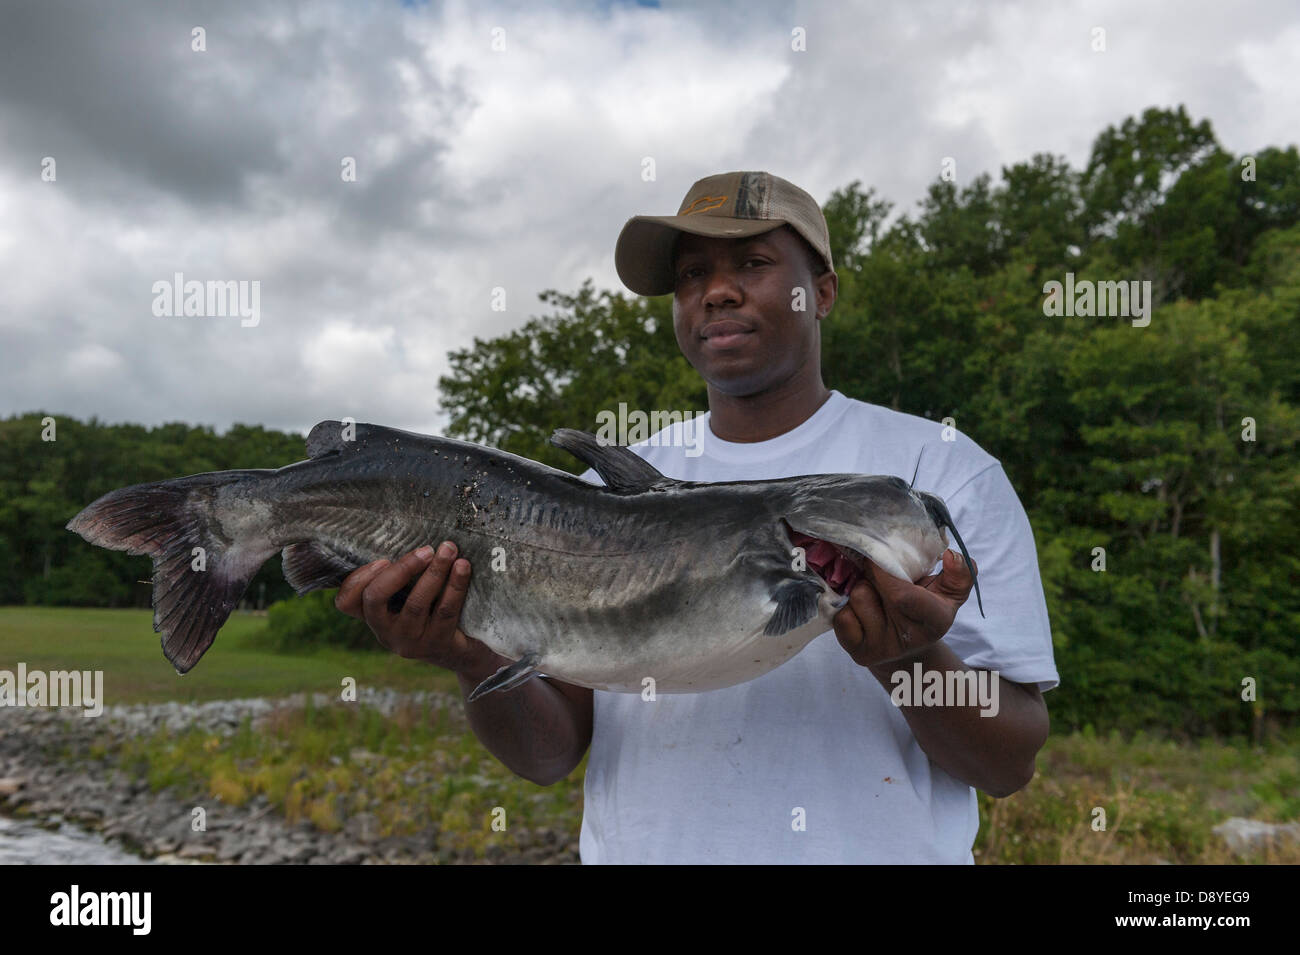 Fishing for catfish at the Rodman Dam on the Ocklawaha River in